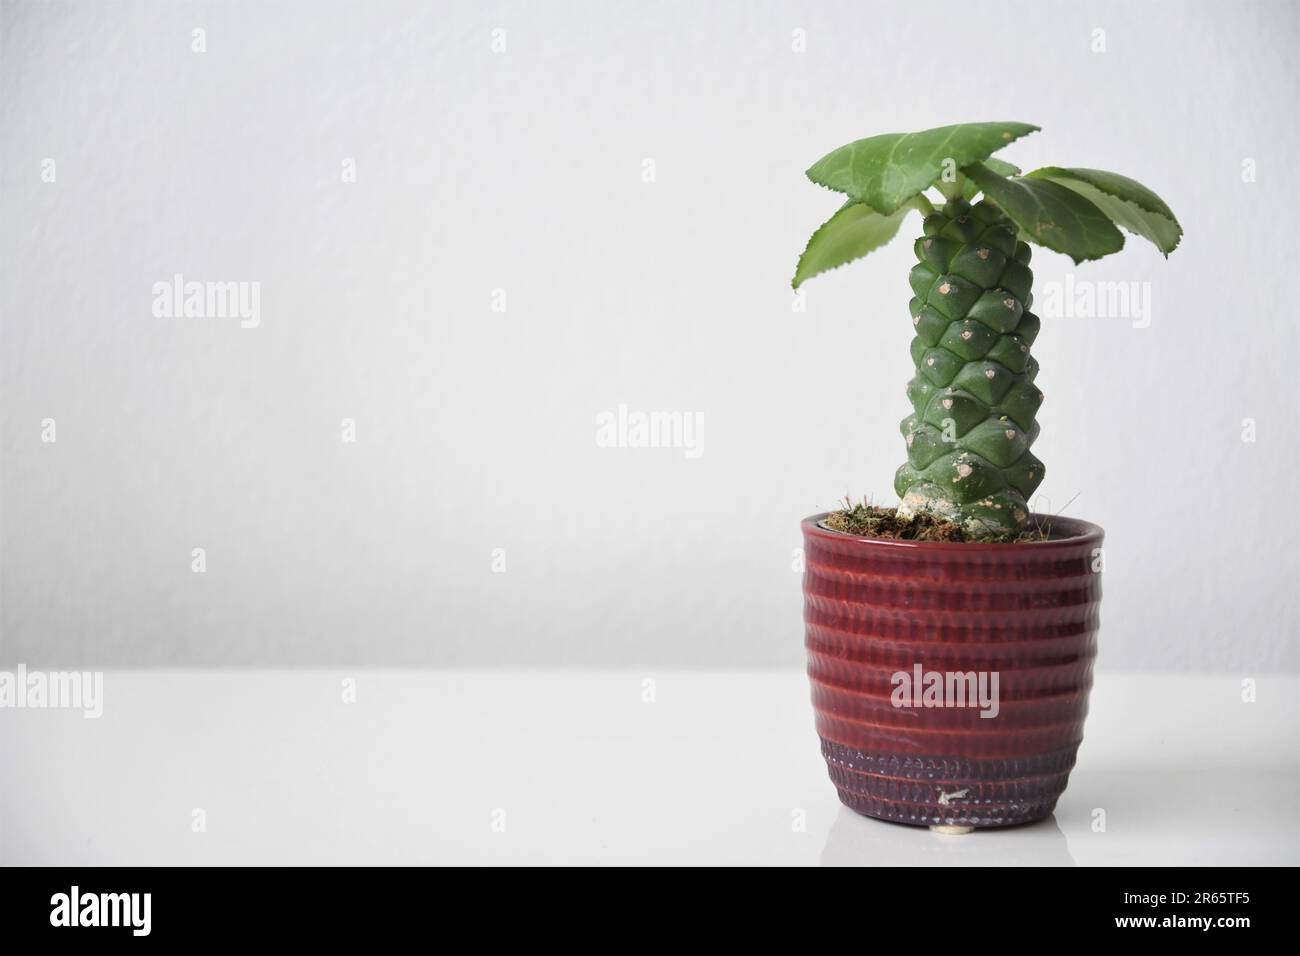 Euphorbia ritchiei (Monadenium ritchiei) houseplant in a red pot, isoalted on a white background. Green succulent cactus with leaves. Stock Photo